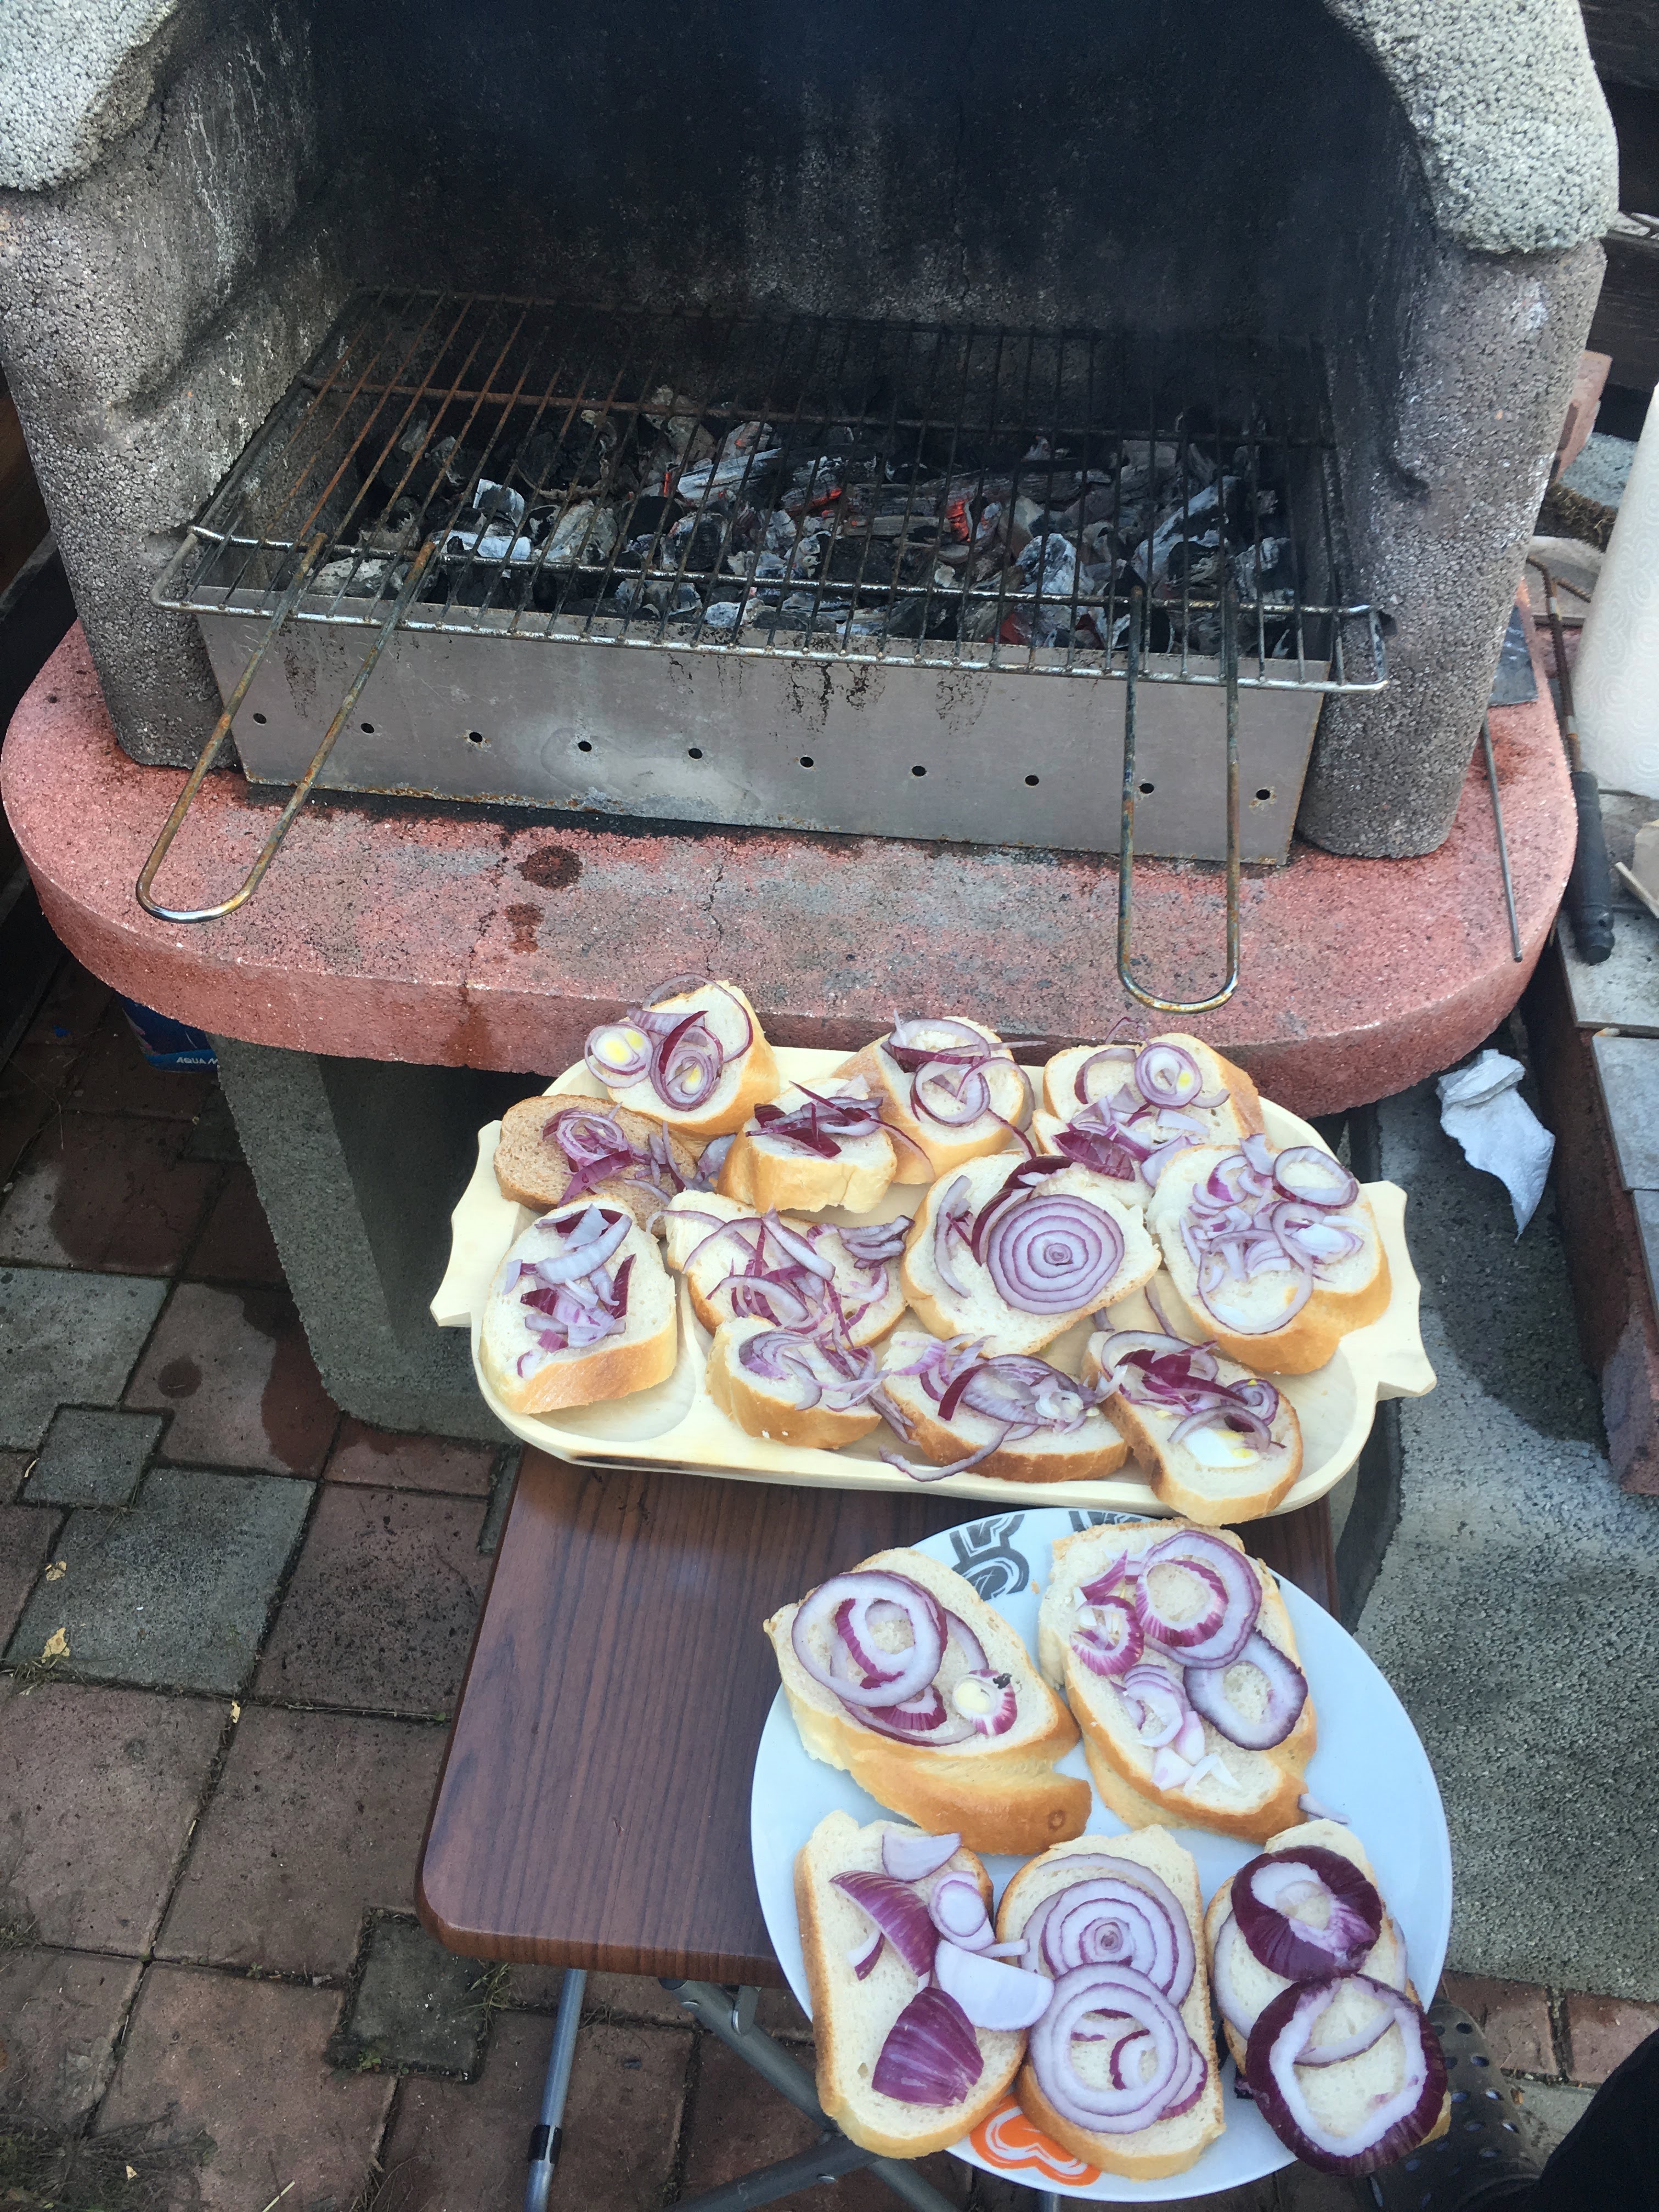 Bread with onion near grill